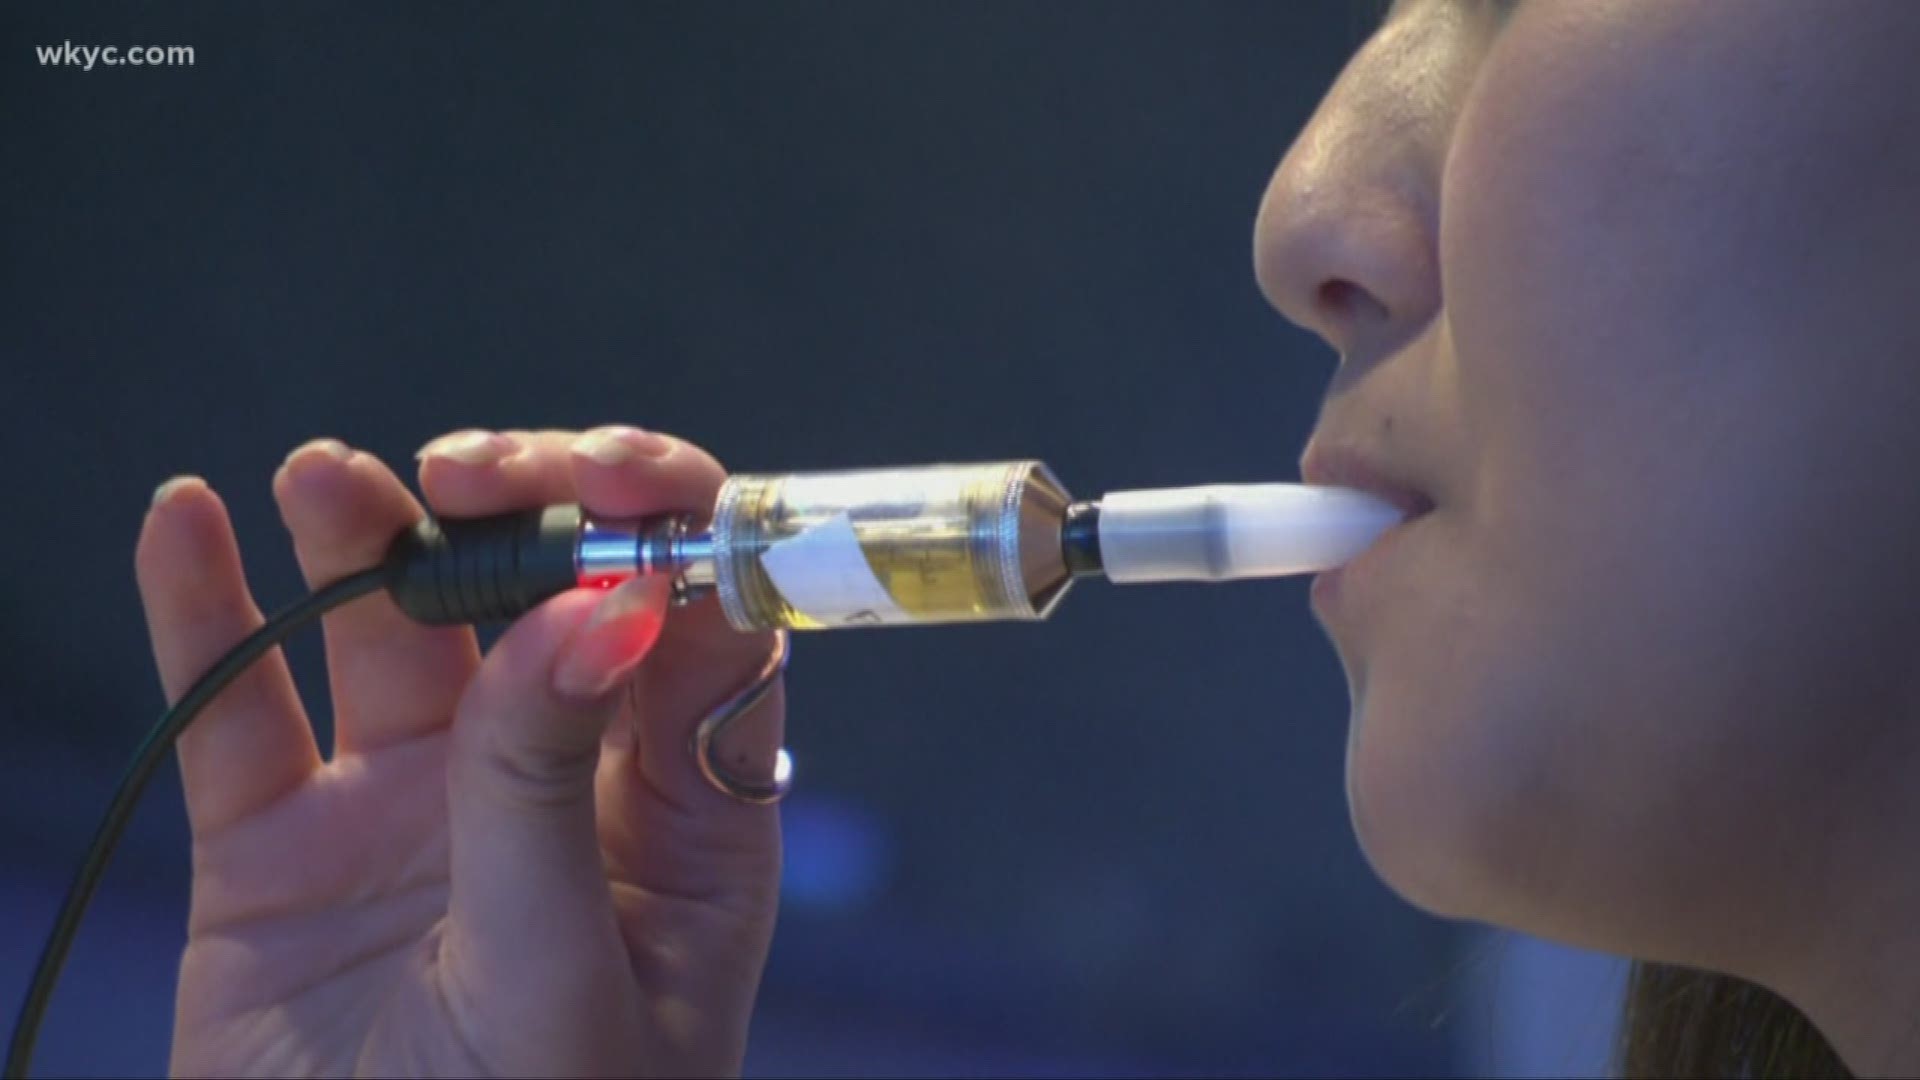 The e-cigarette industry is now being targeted by the Trump adminstration, which is planning a ban on flavored e-cigarettes and vape products. Across the country, six people have died and hundreds of cases of lung-related illnesses are under investigation.